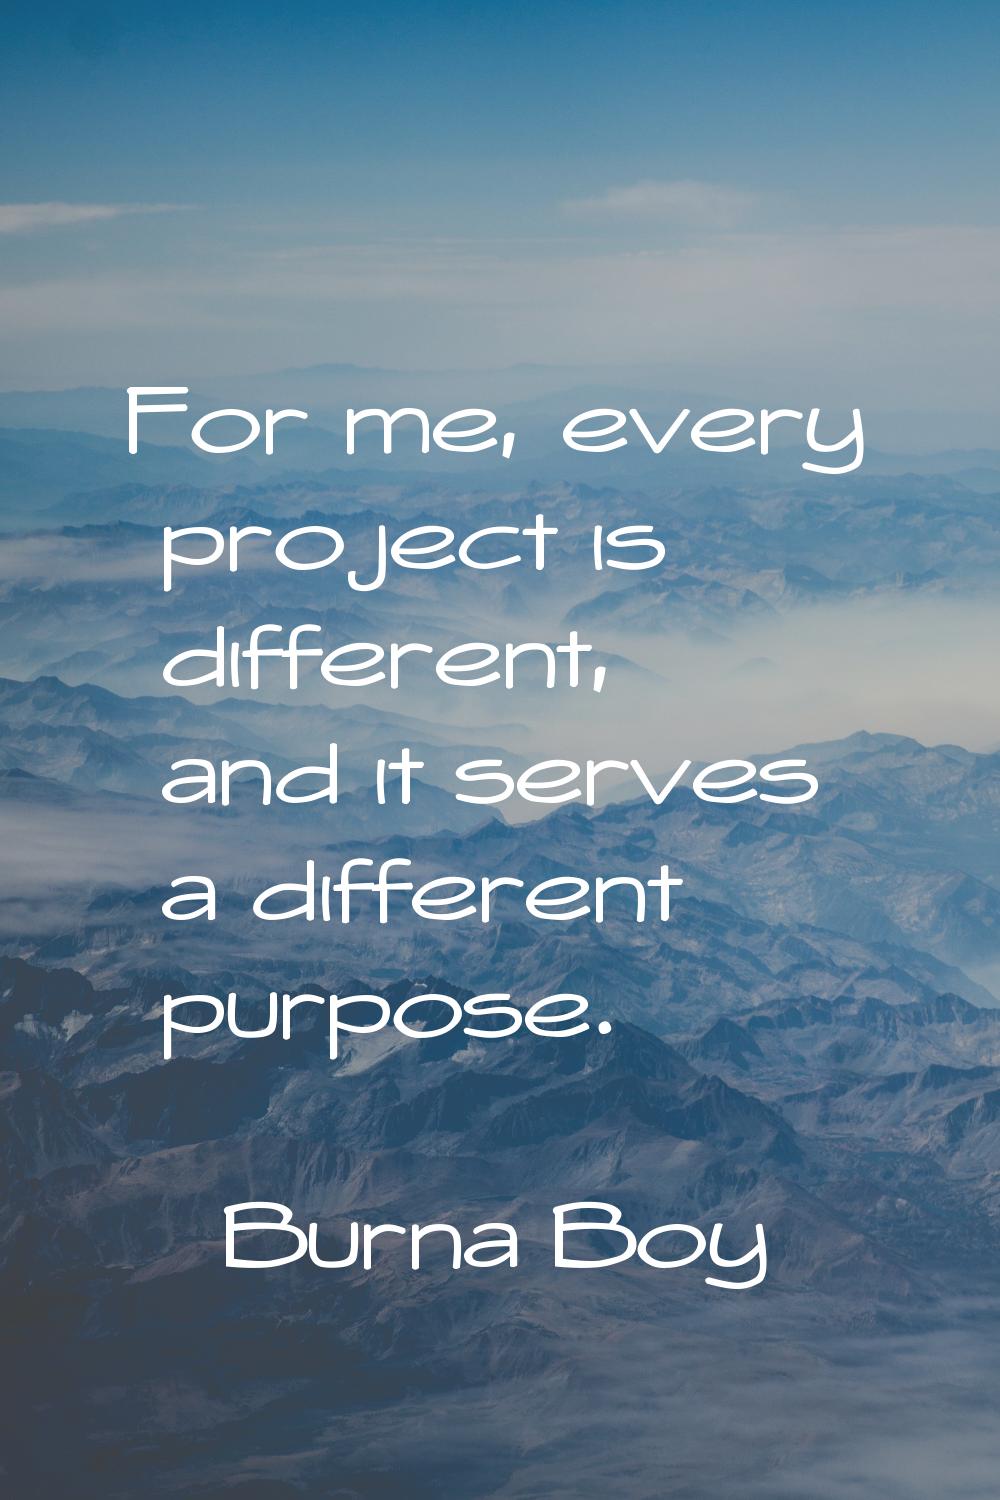 For me, every project is different, and it serves a different purpose.